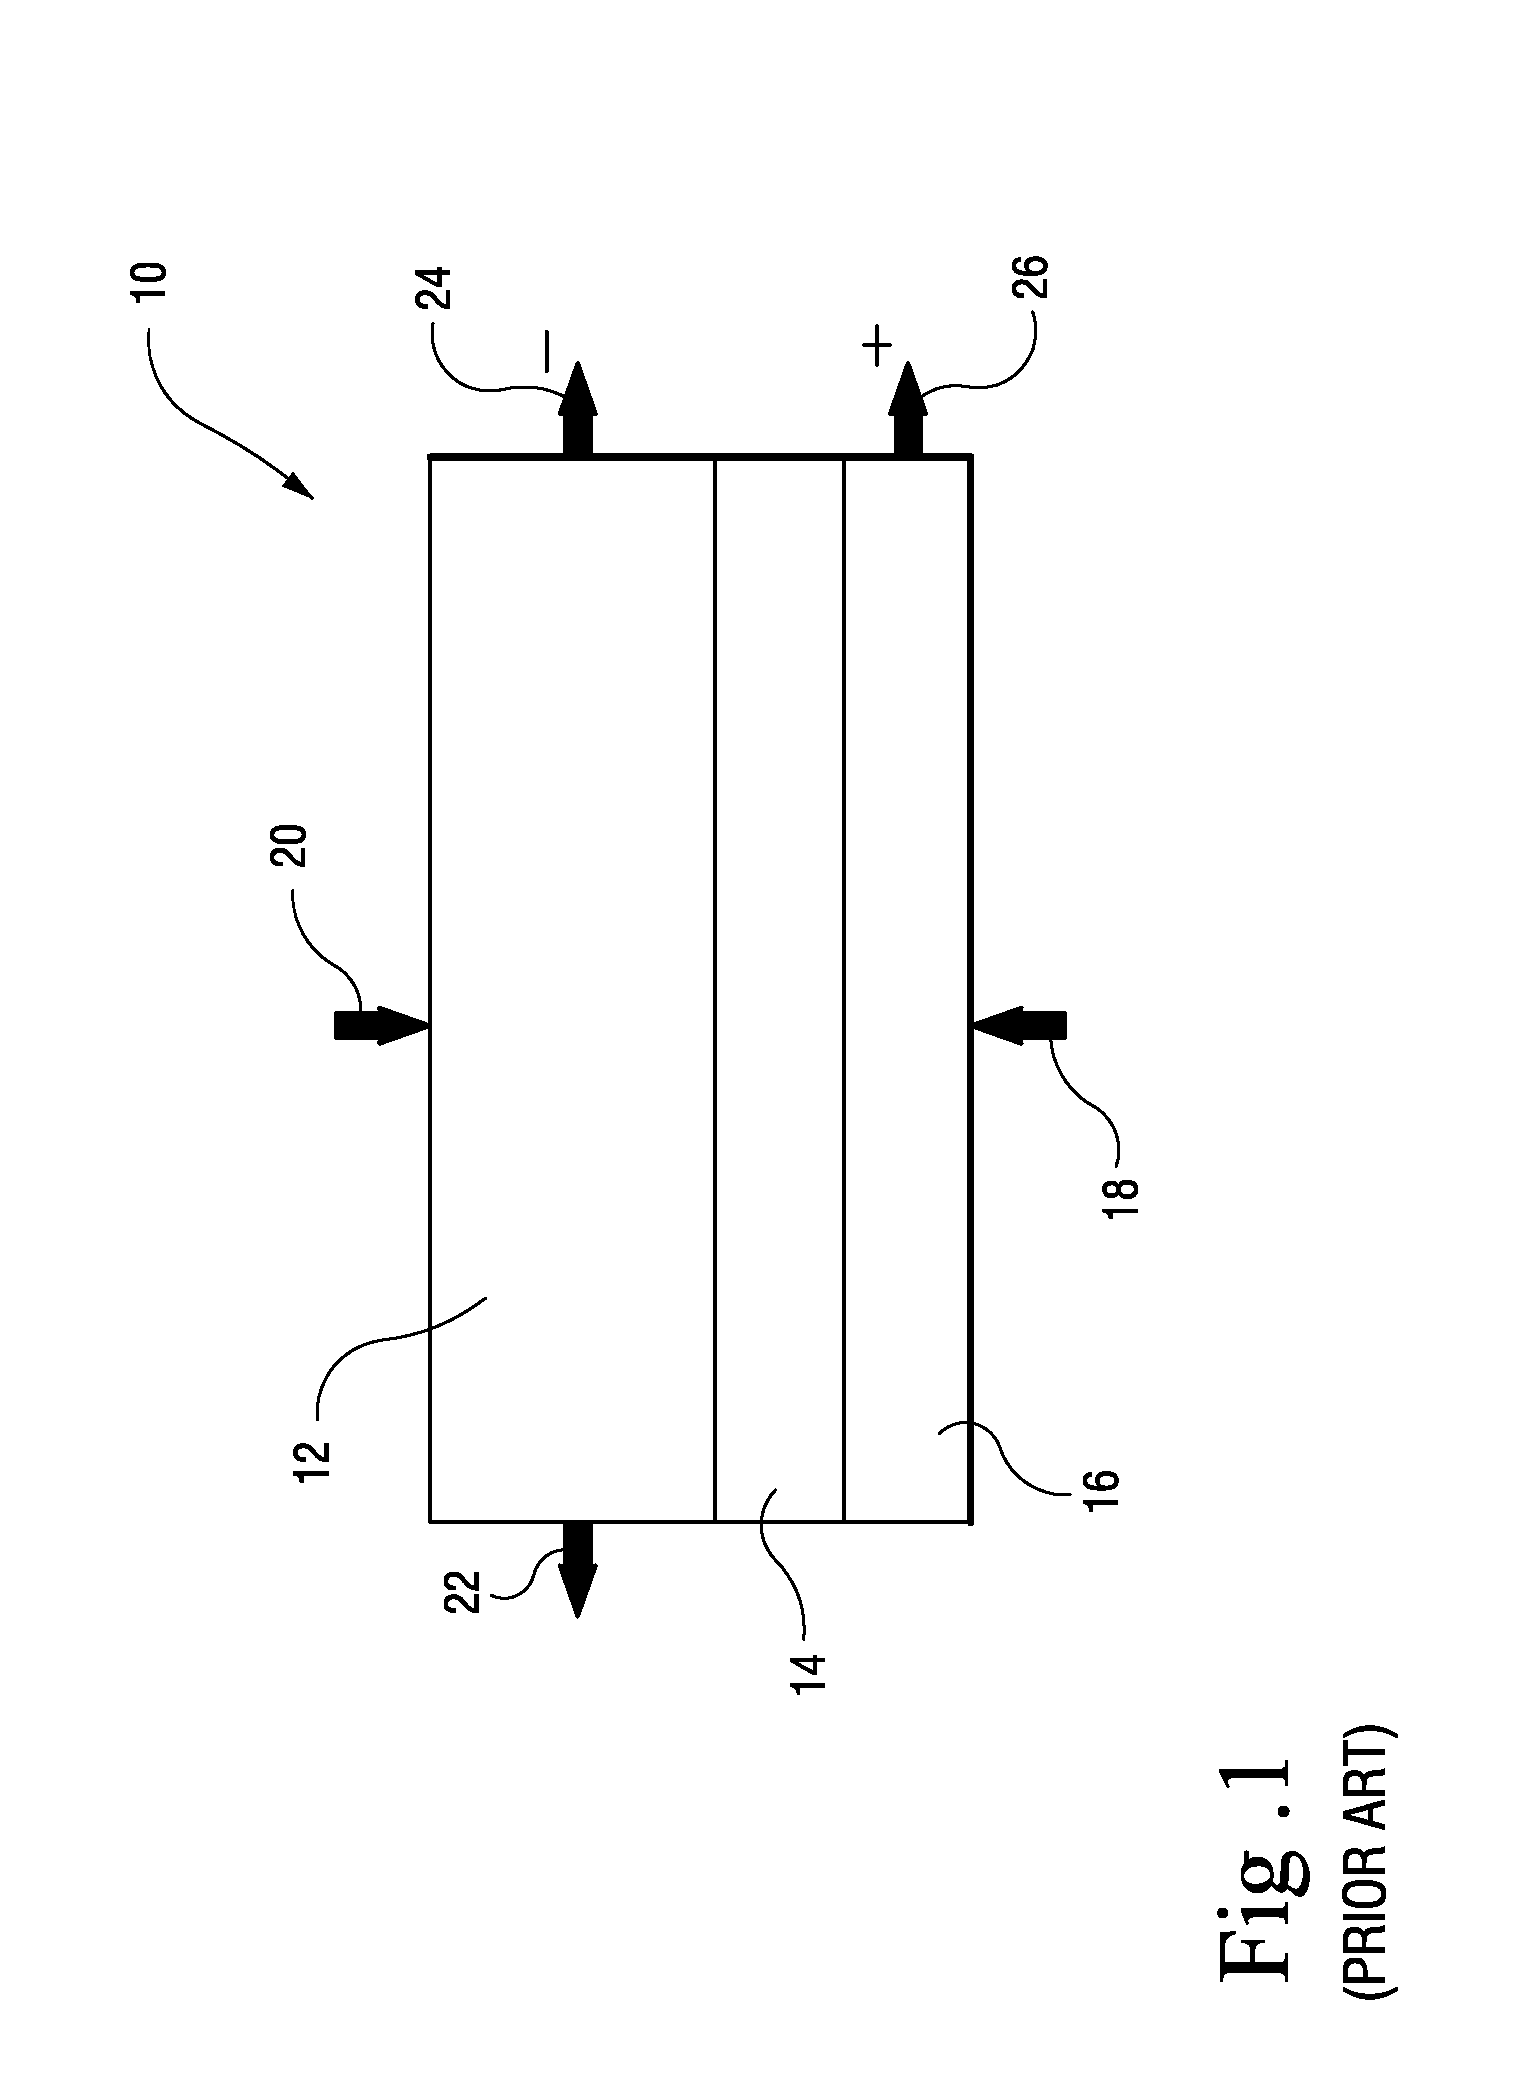 Solid-state fuel cell and related method of manufacture